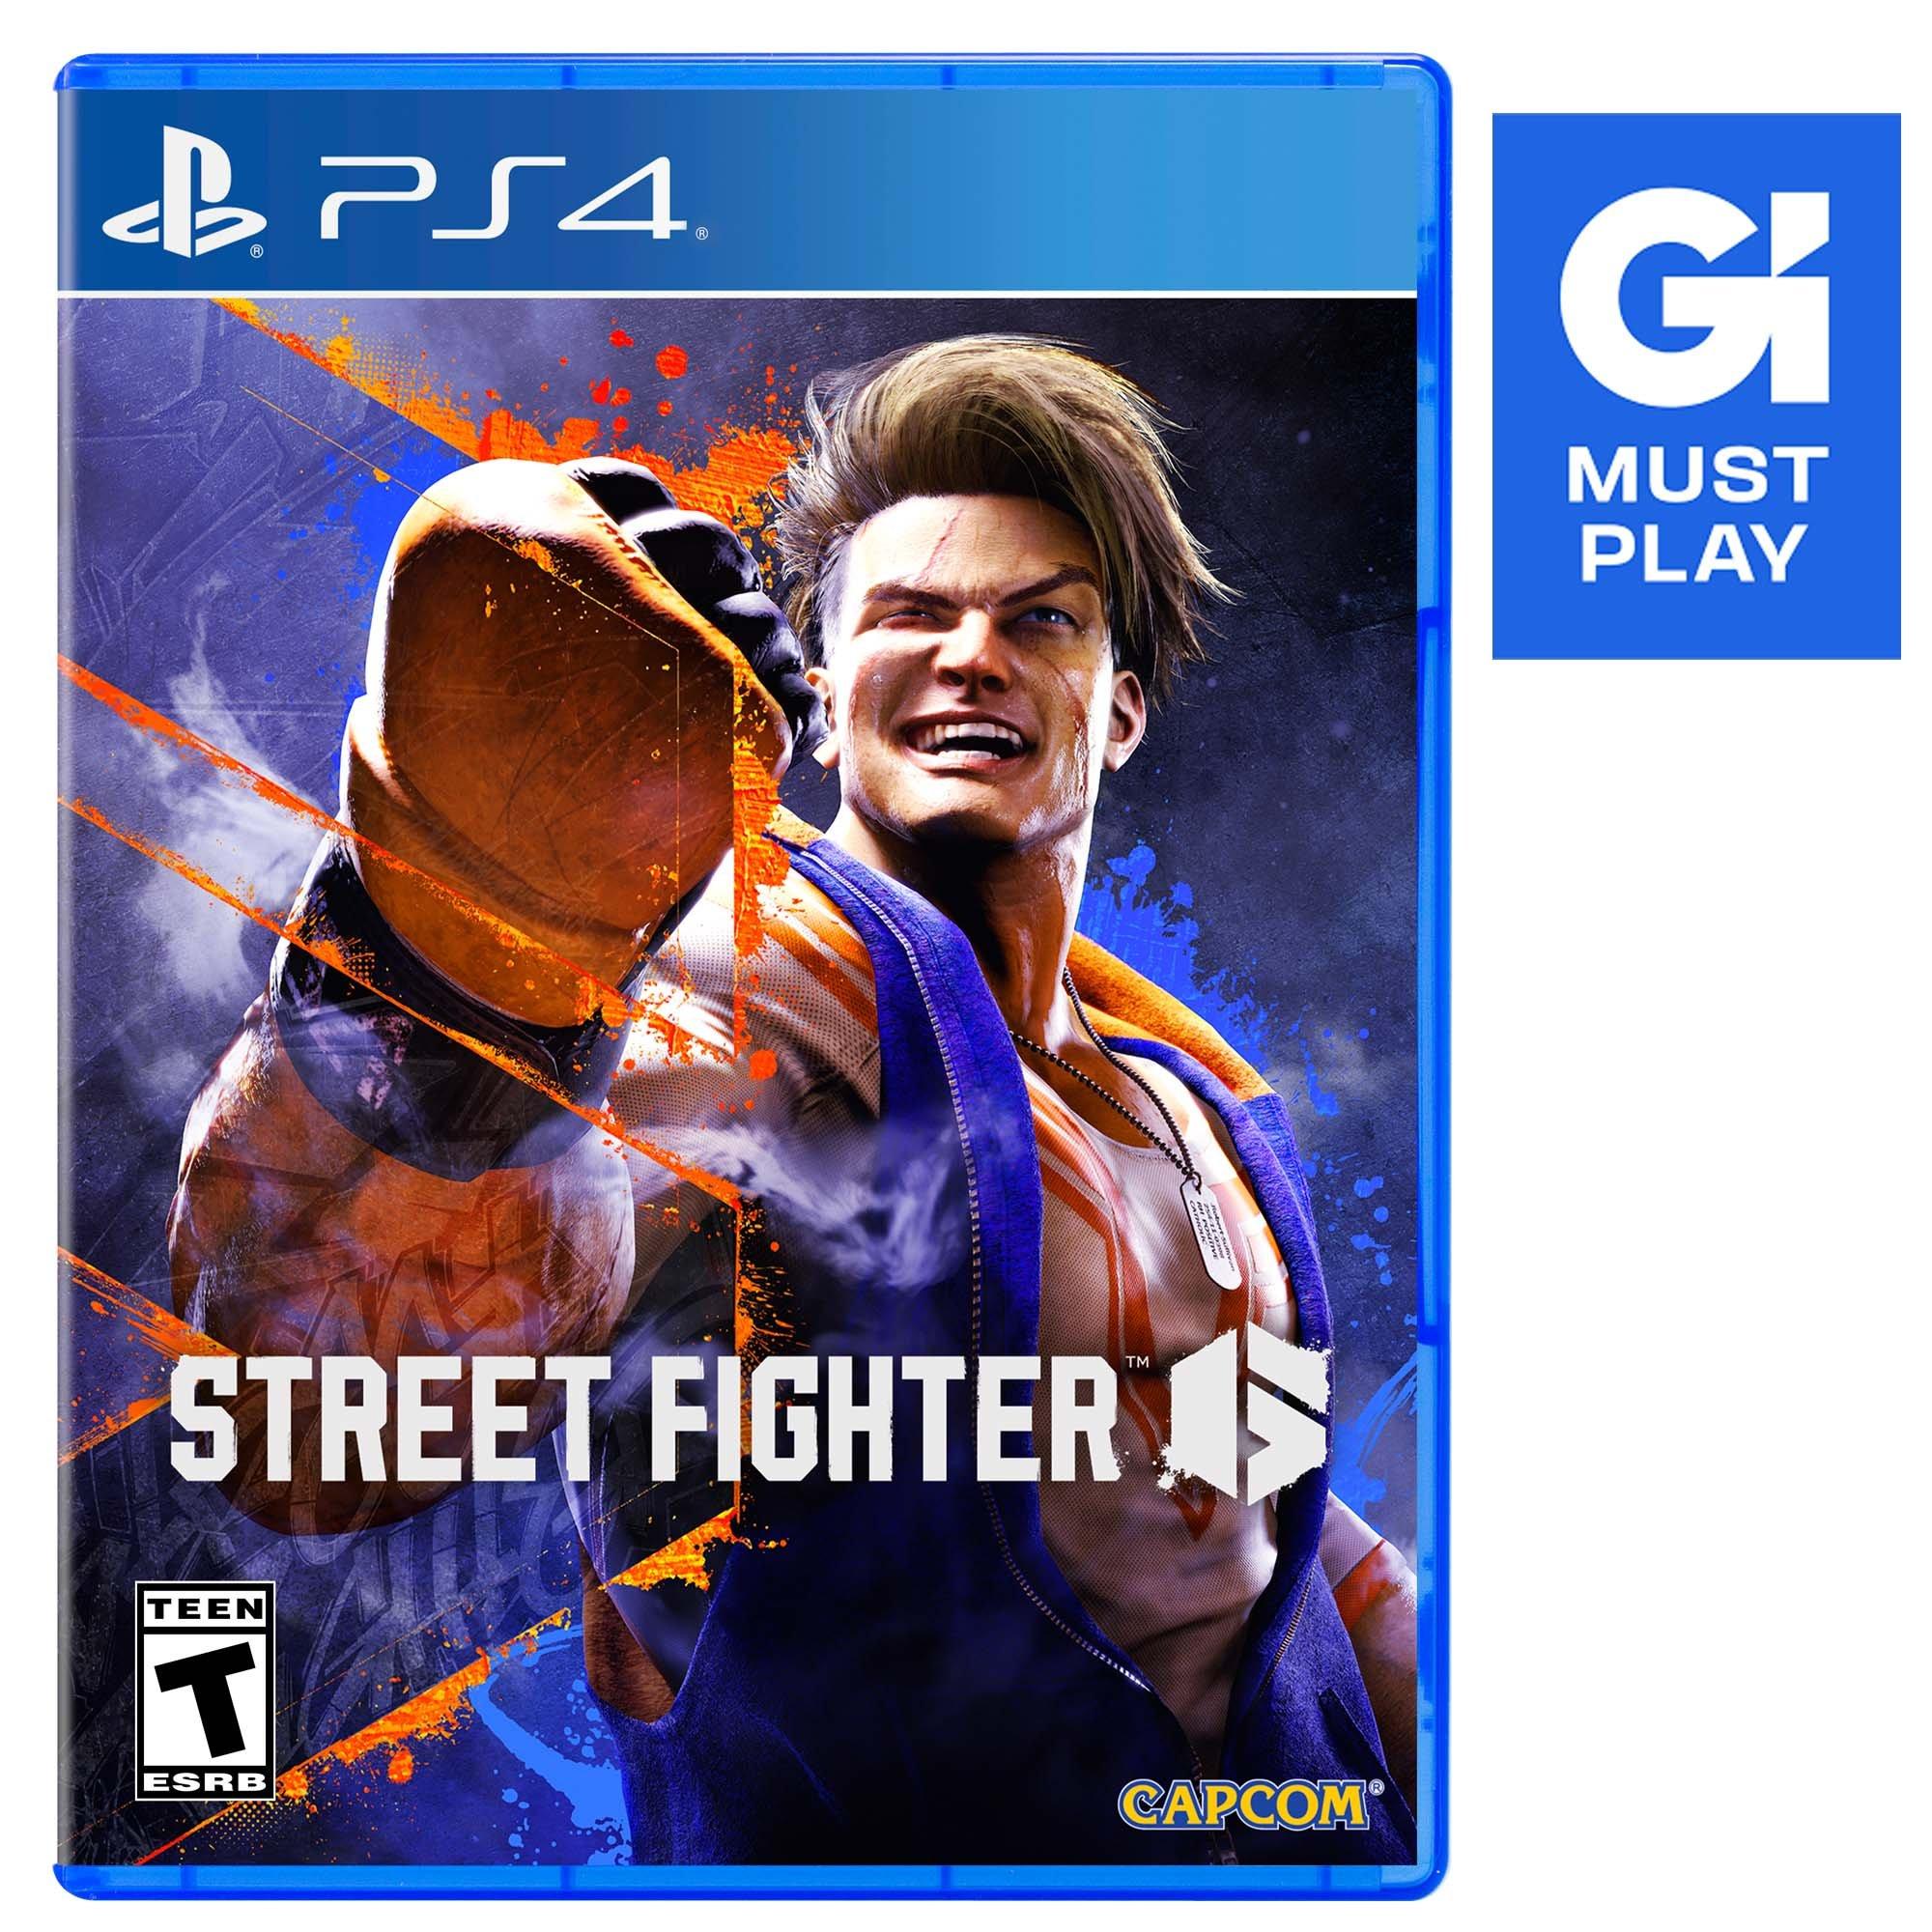 Street Fighter 6's Demo completely sold me on the PlayStation 4 Pro version  of the game but how does the base PS4 hold up?